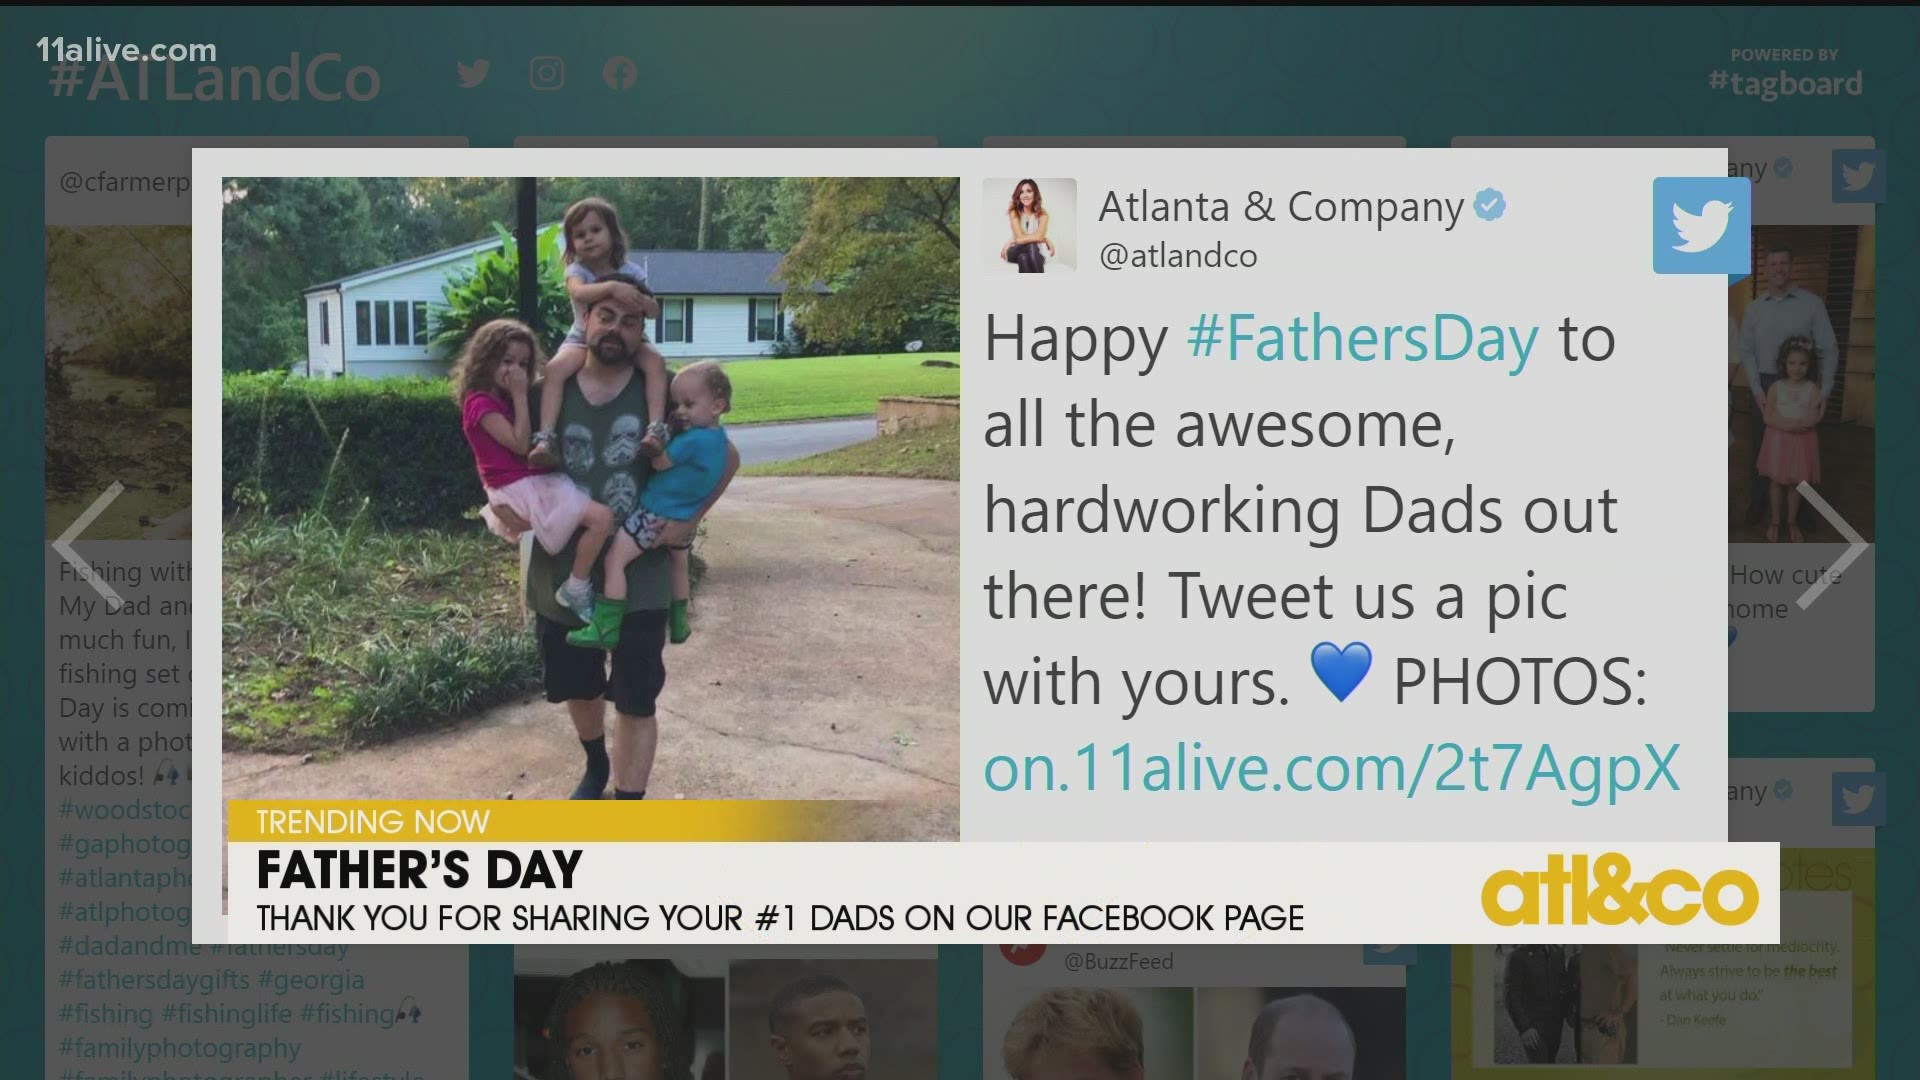 Thank you for sharing your Father's Day pics on the A&C Facebook page and @ATLandCo.